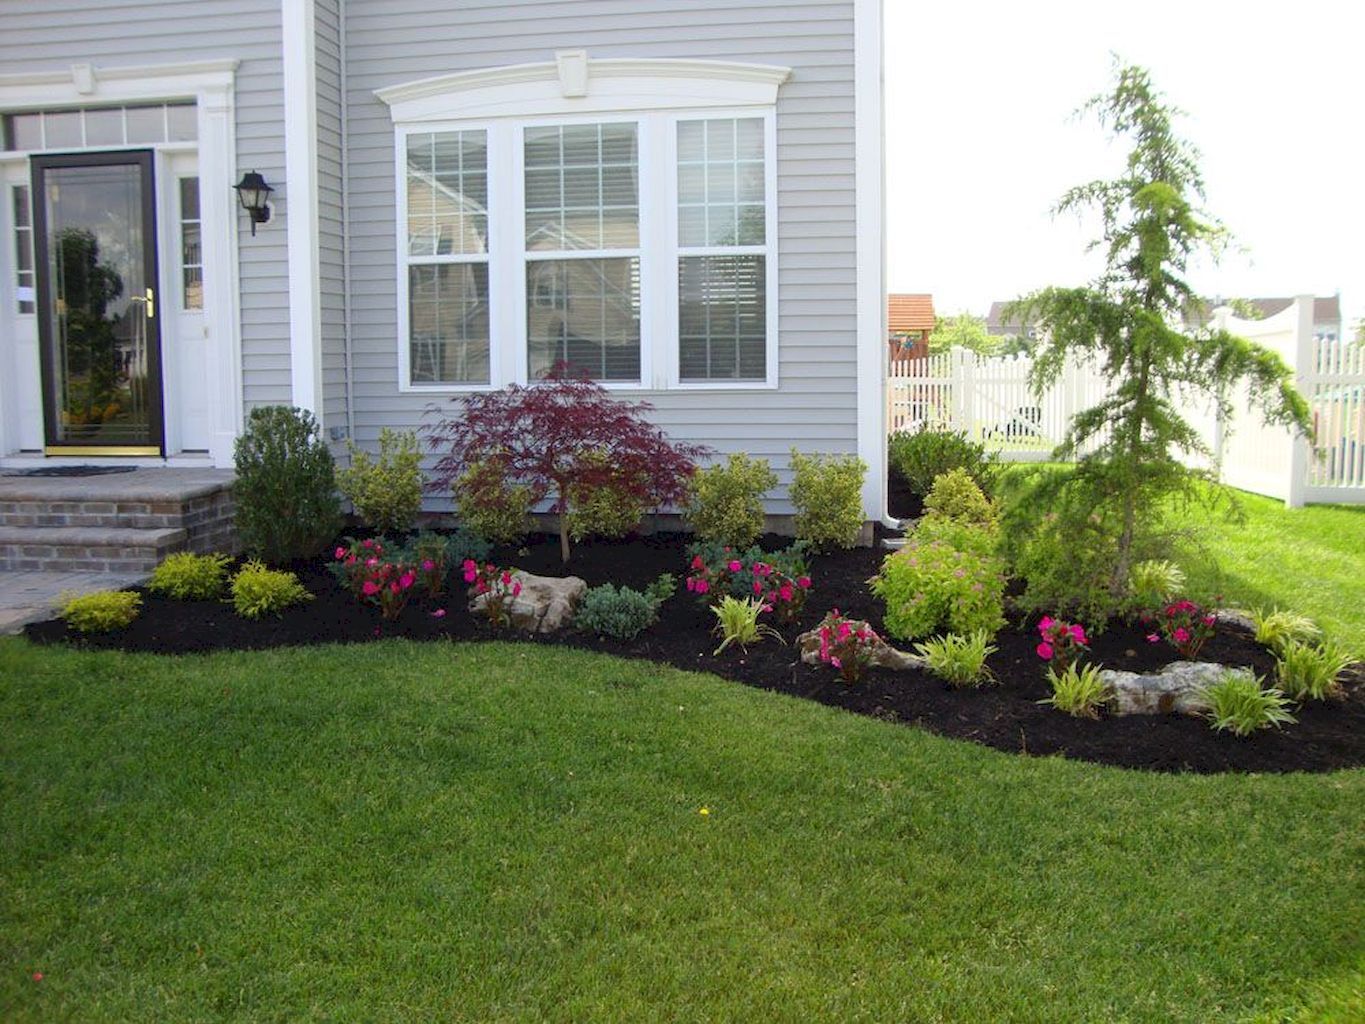 Landscaping Design Ideas Front Yard 14